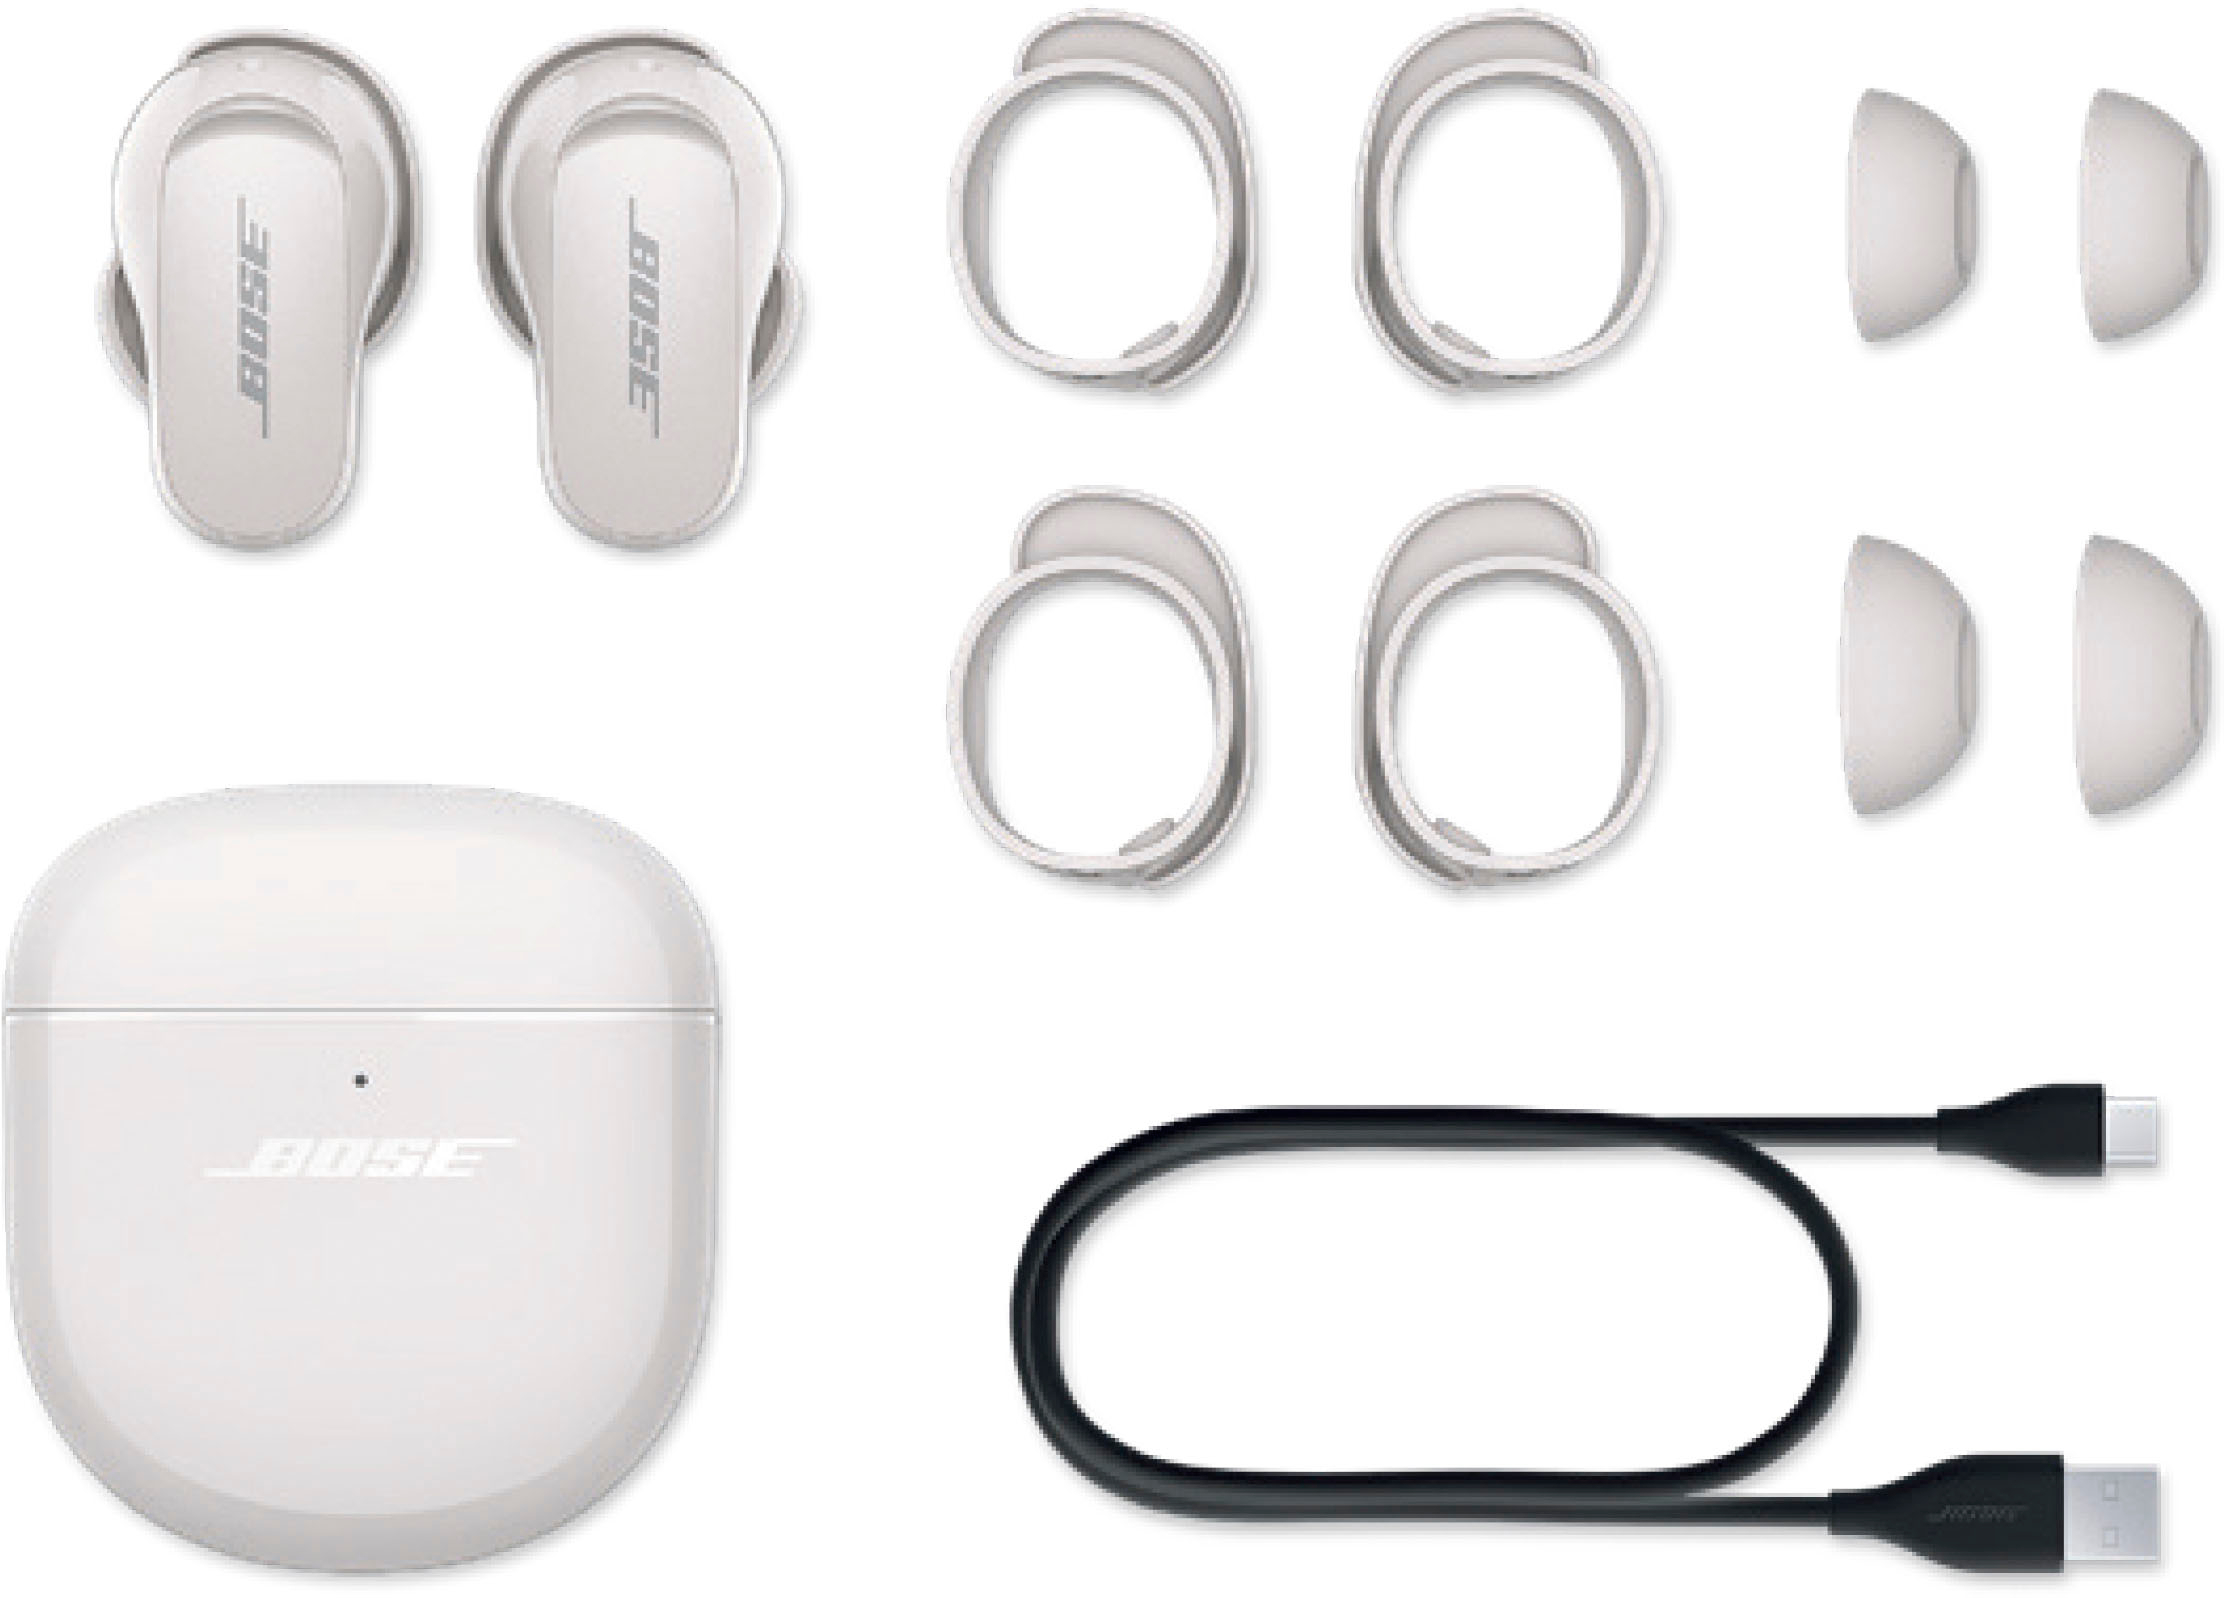 Bose QuietComfort Earbuds II, Soapstone with Alternate Sizing Kit  870730-0020 A